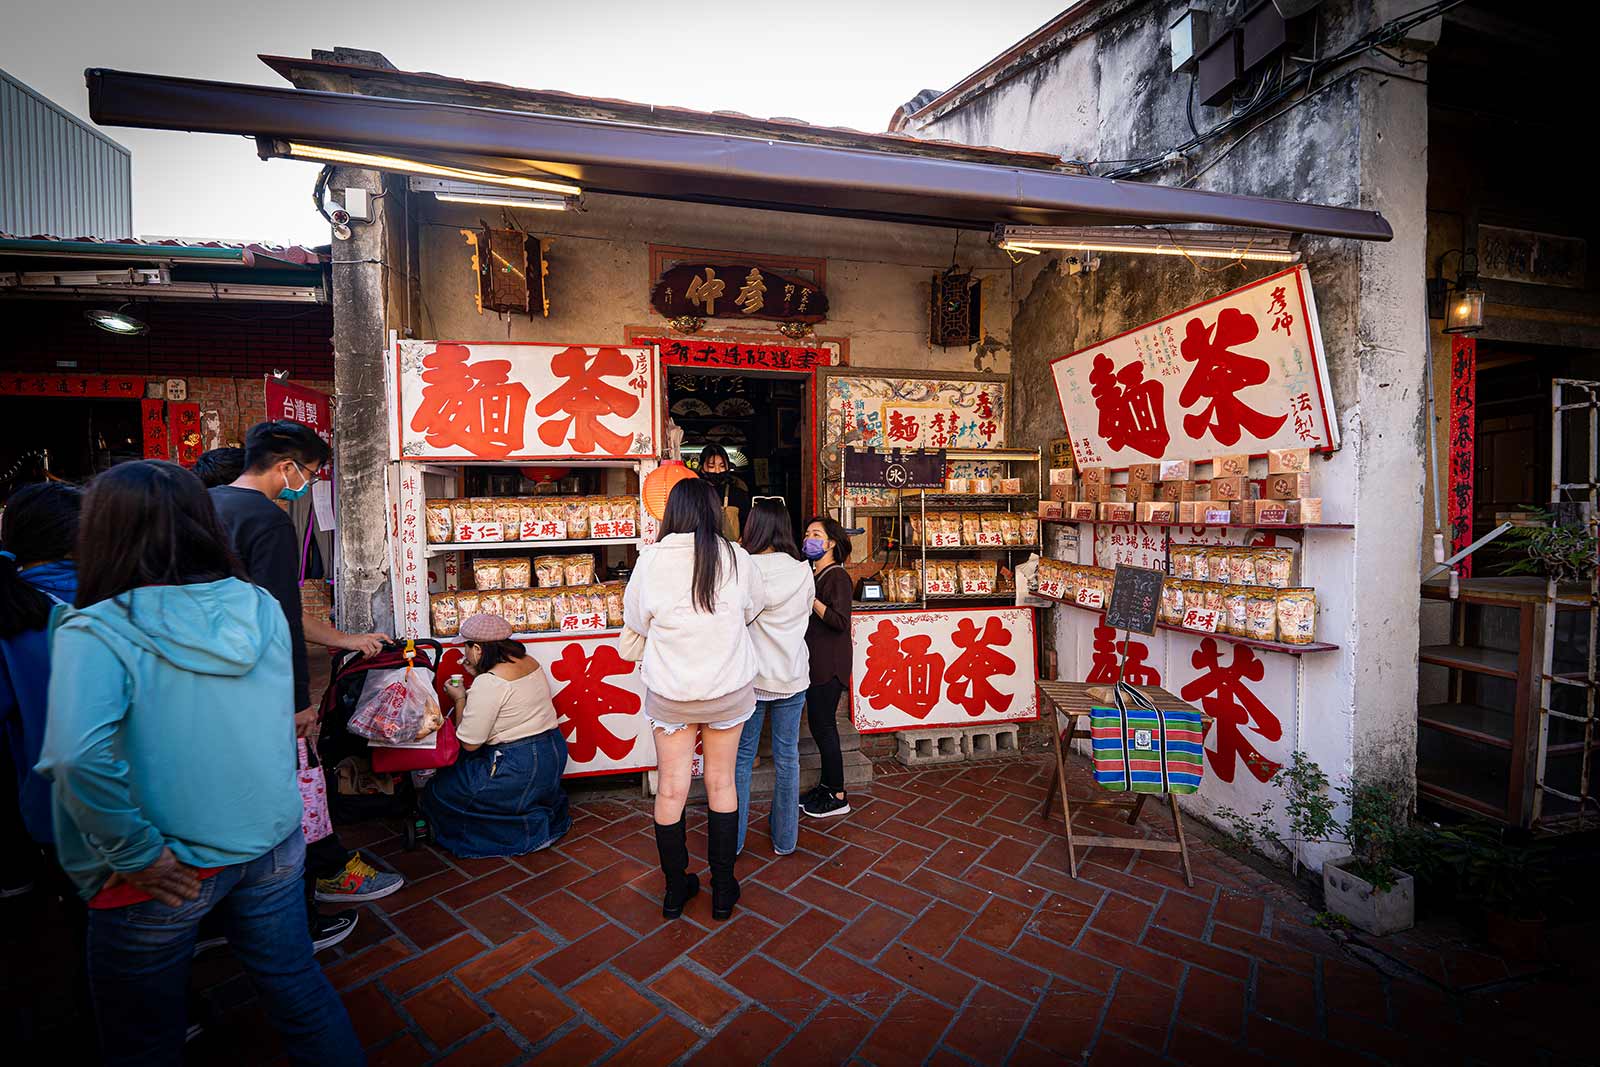 A small shop run out of someone's one-story home sells roasted wheat flour; the outside of the shop is adorned in white plaques with "roasted wheat flour" written in Chinese characters.